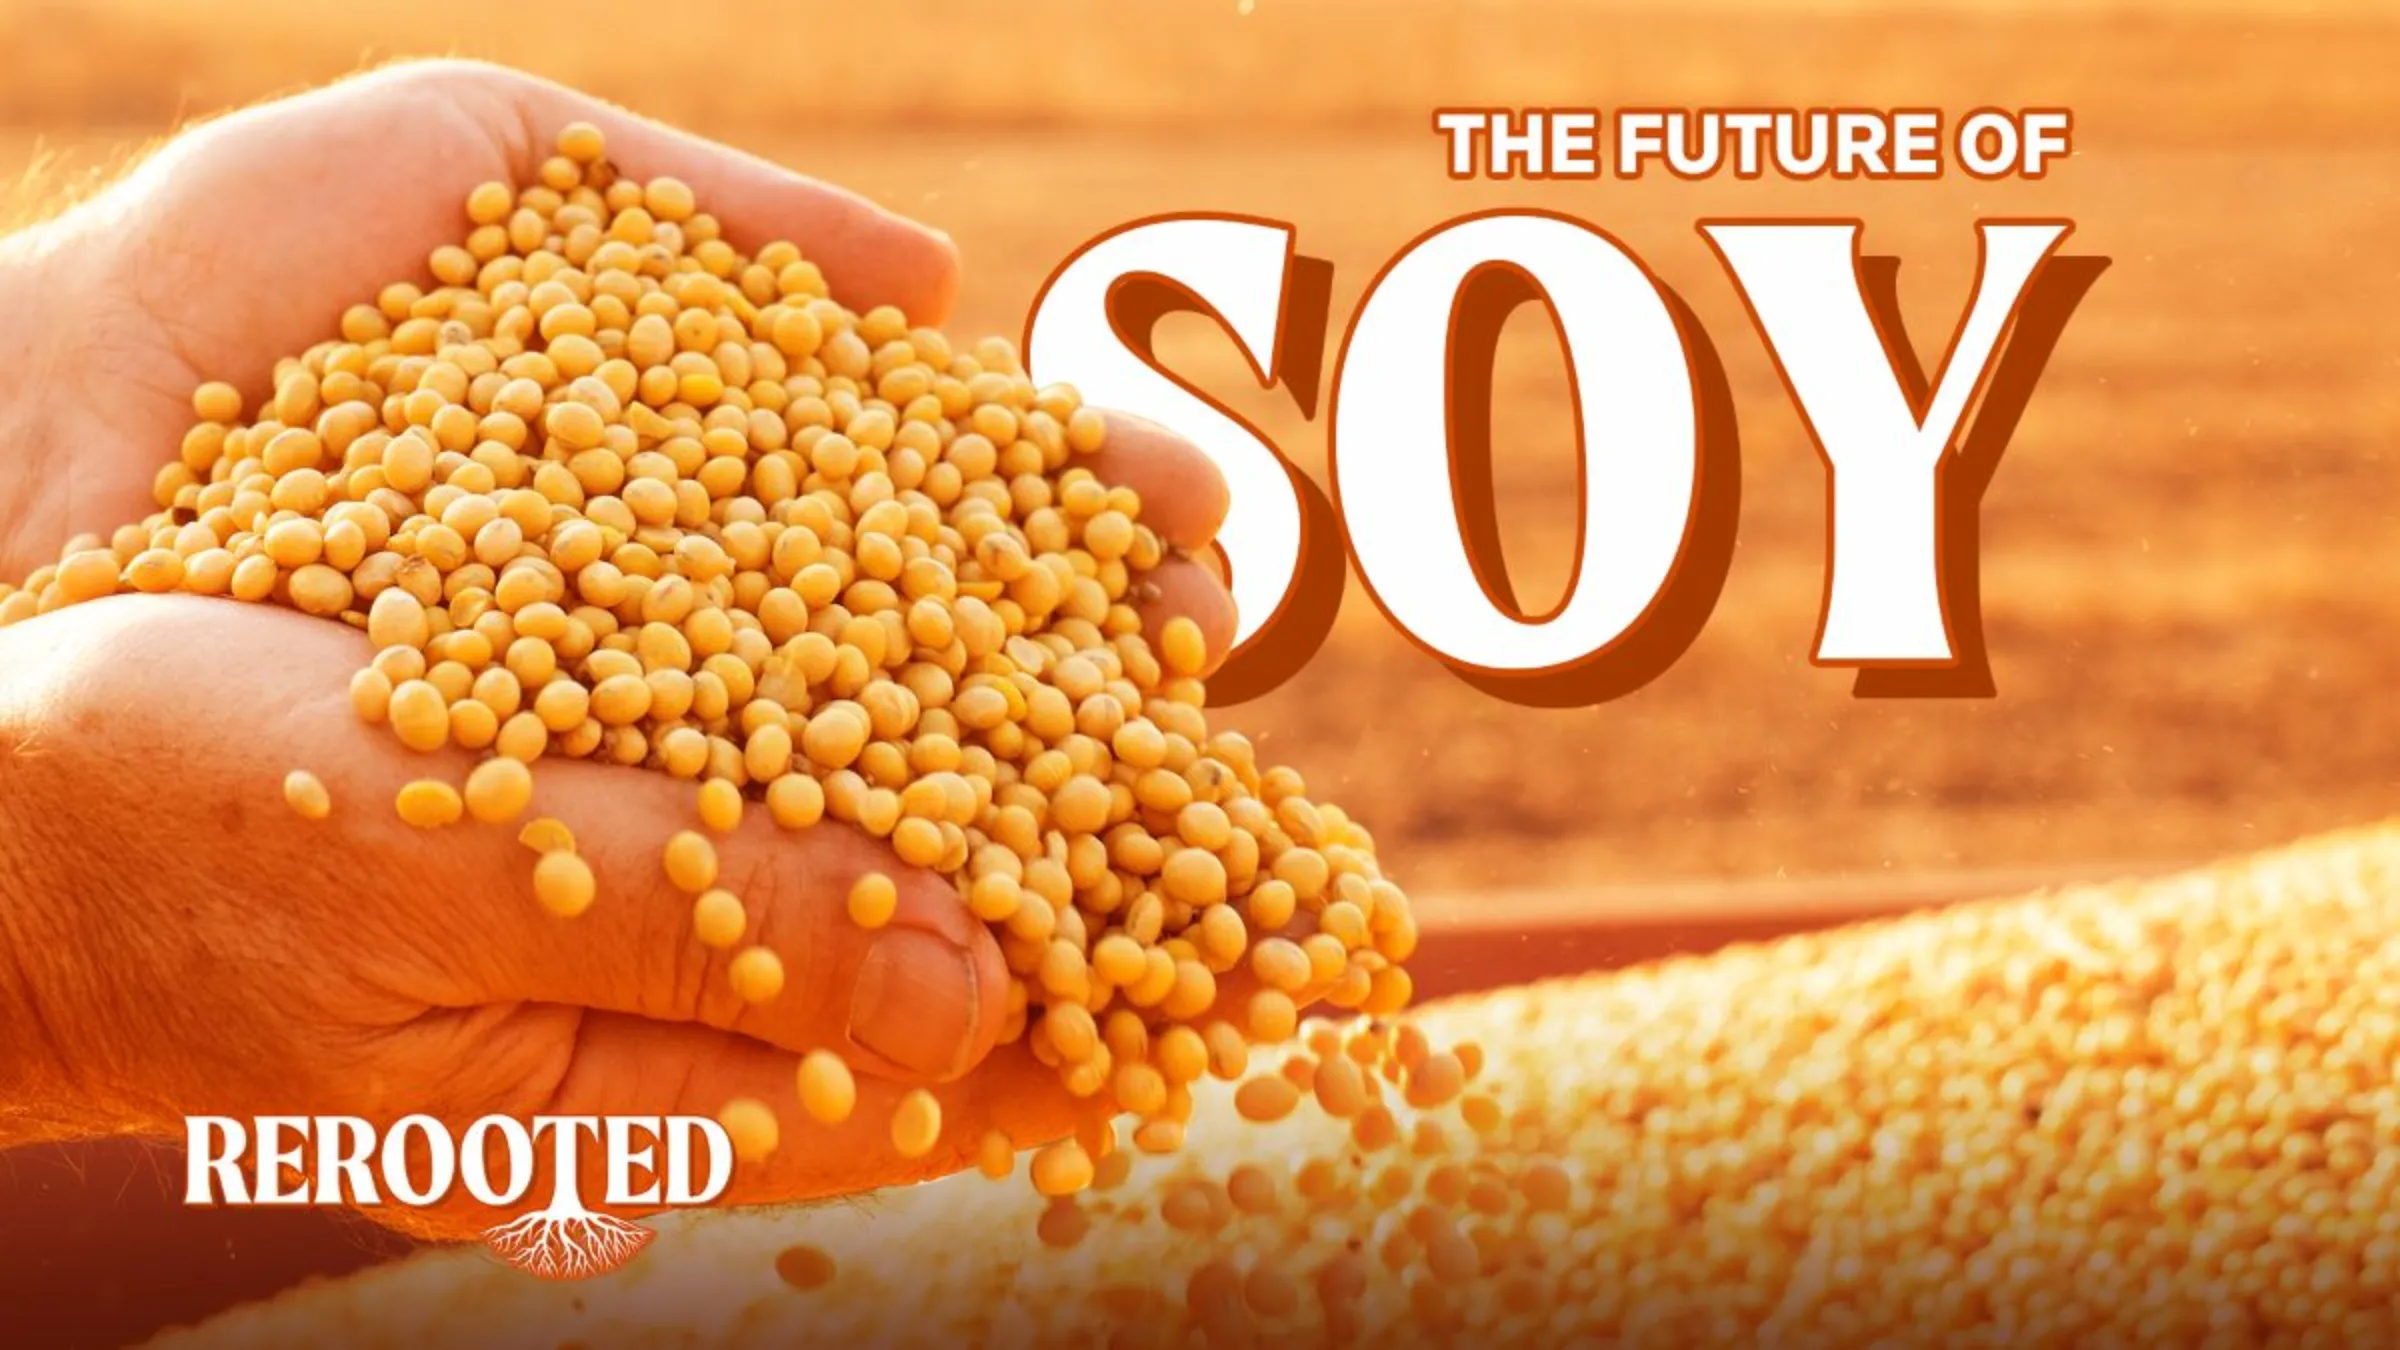 Soybeans spill out of cupped hands over text reading 'THE FUTURE OF SOY' in this illustration picture. Thomson Reuters Foundation/Karif Wat